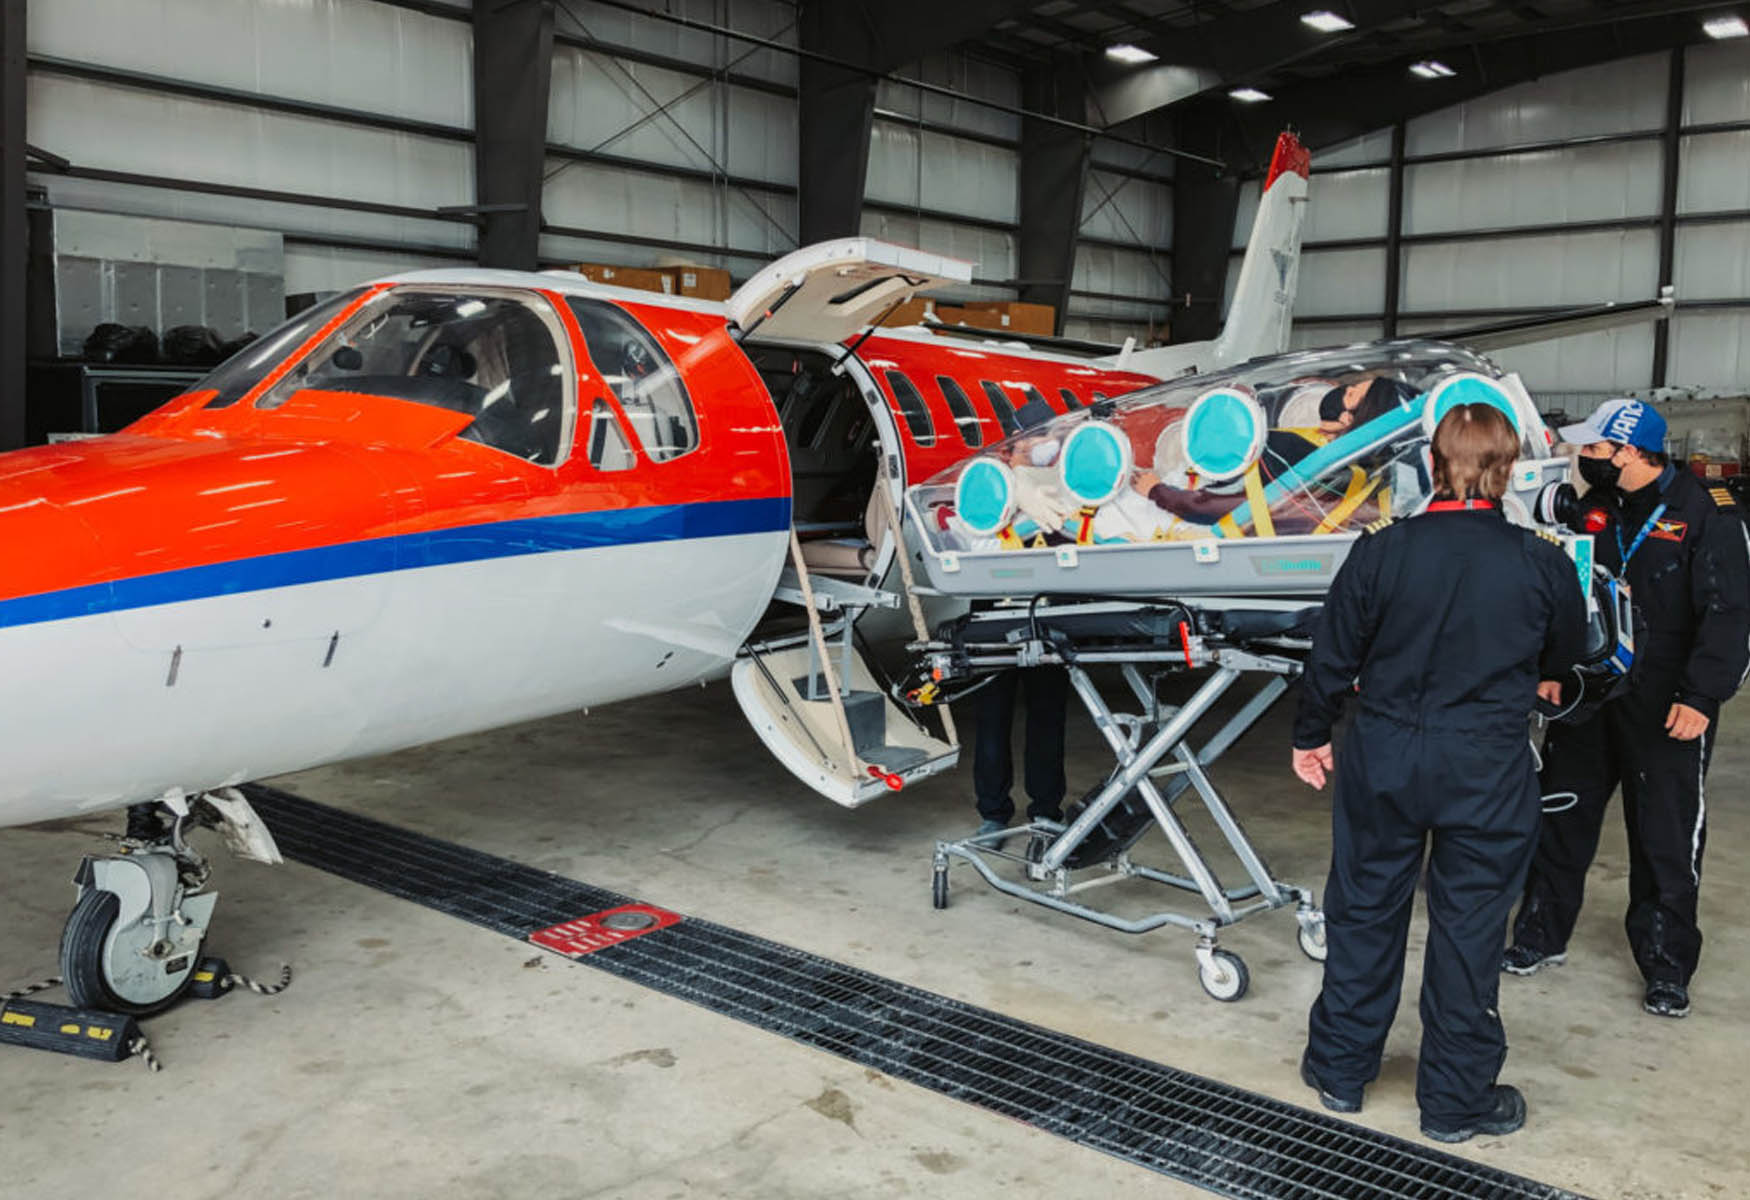 Air Ambulance Service – Are You Prepared If You Need One?